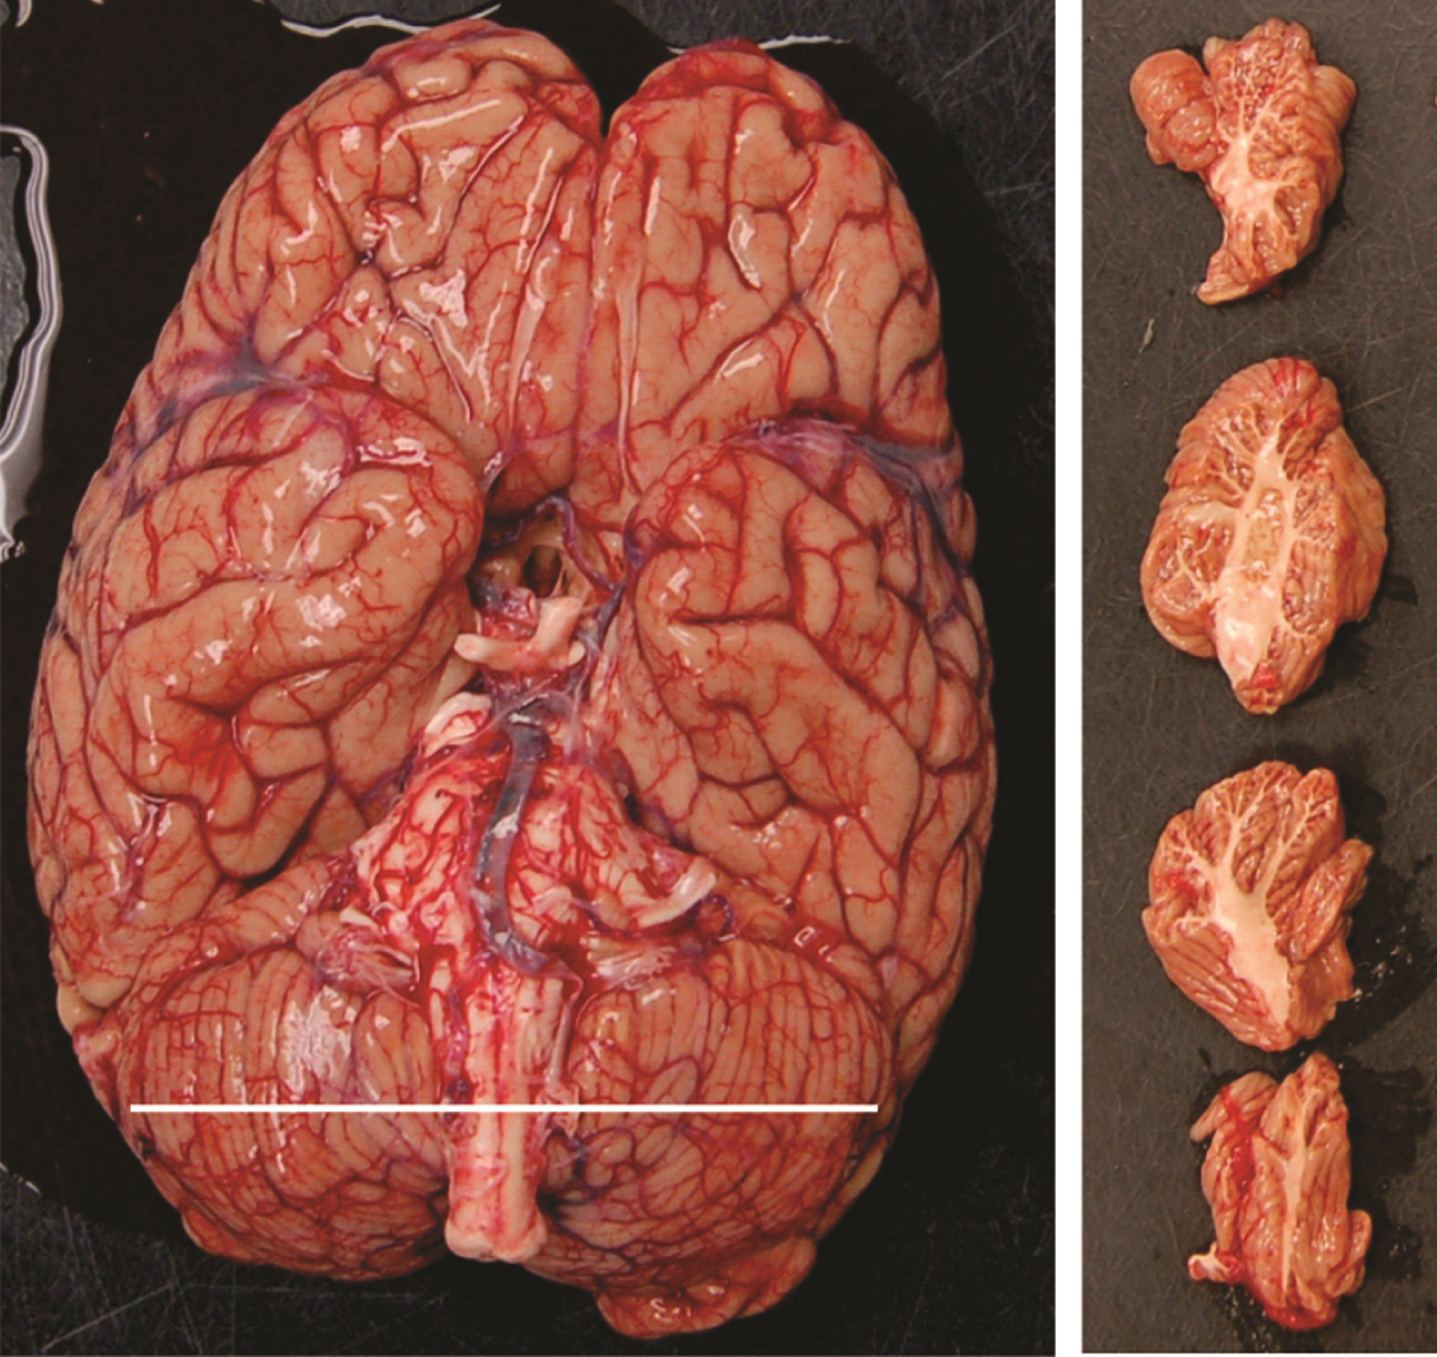 Ventral view of a brain demonstrating the cerebellum width and parasagittal slices of the cerebellum.